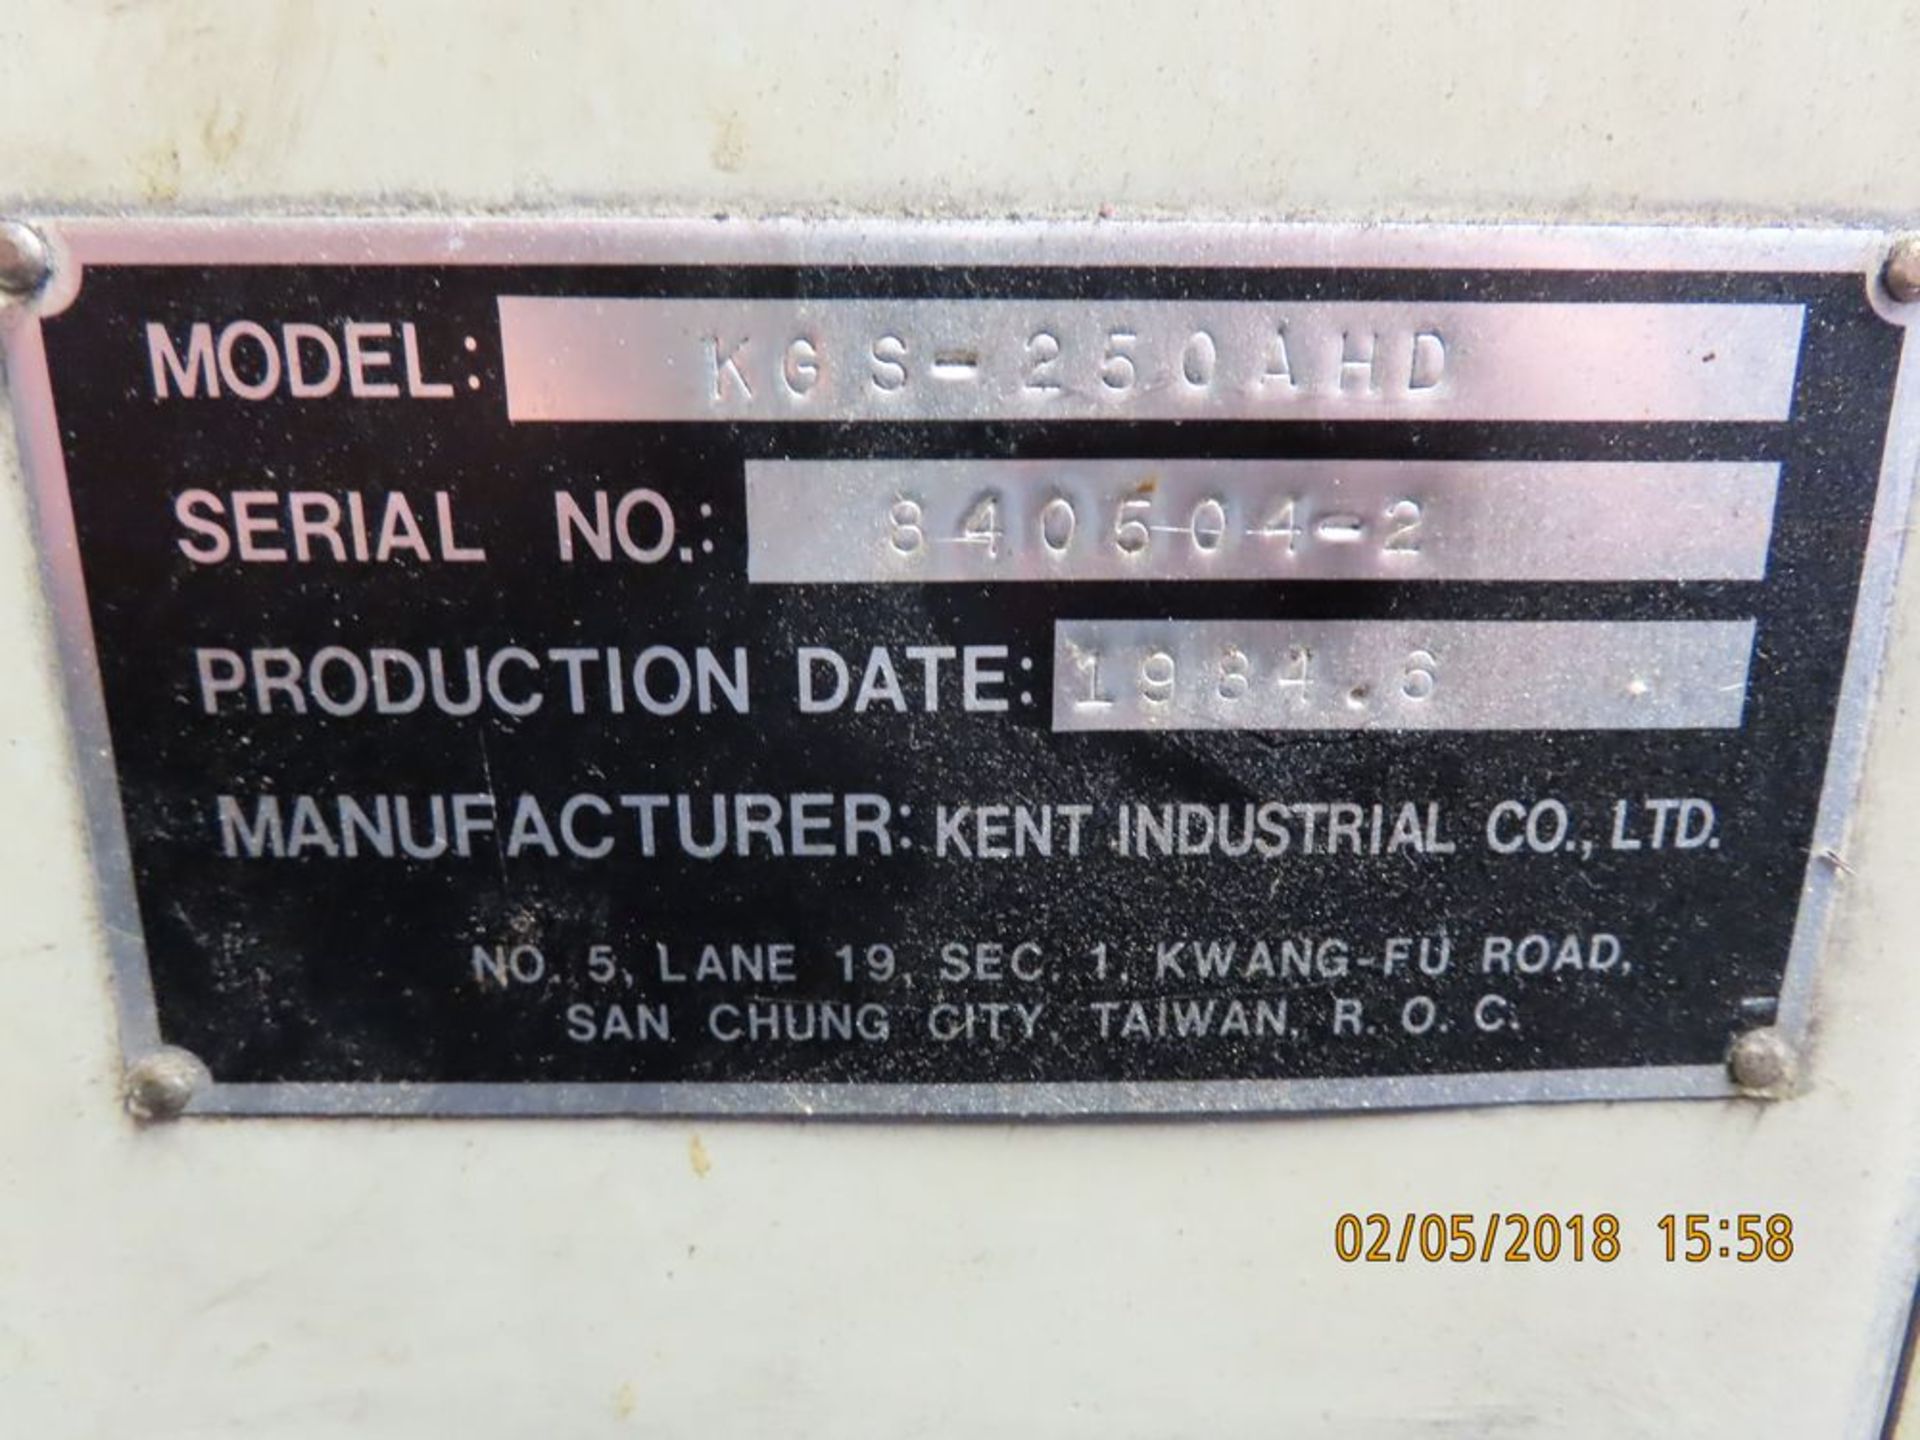 Kent mod. KGS-250AHD, 6'' x 18'' Surface Grinder w/ Mag Chuck; S/N 840504-2 - Image 2 of 2